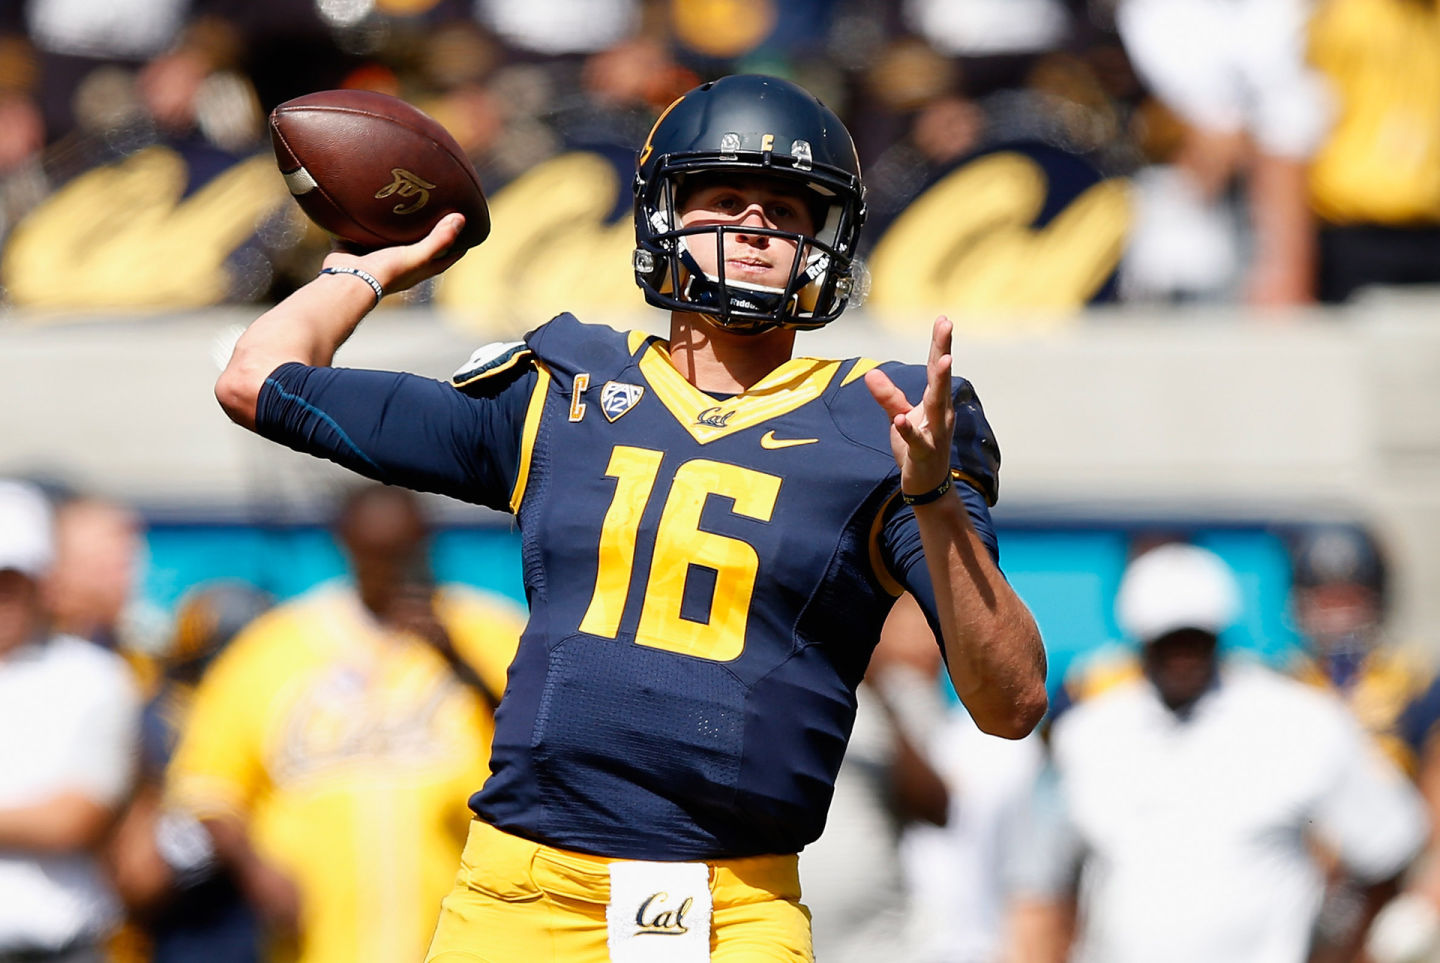 Could Bay Area native Jared Goff stay local and play for the 49ers? (Ezra Shaw/Getty Images)